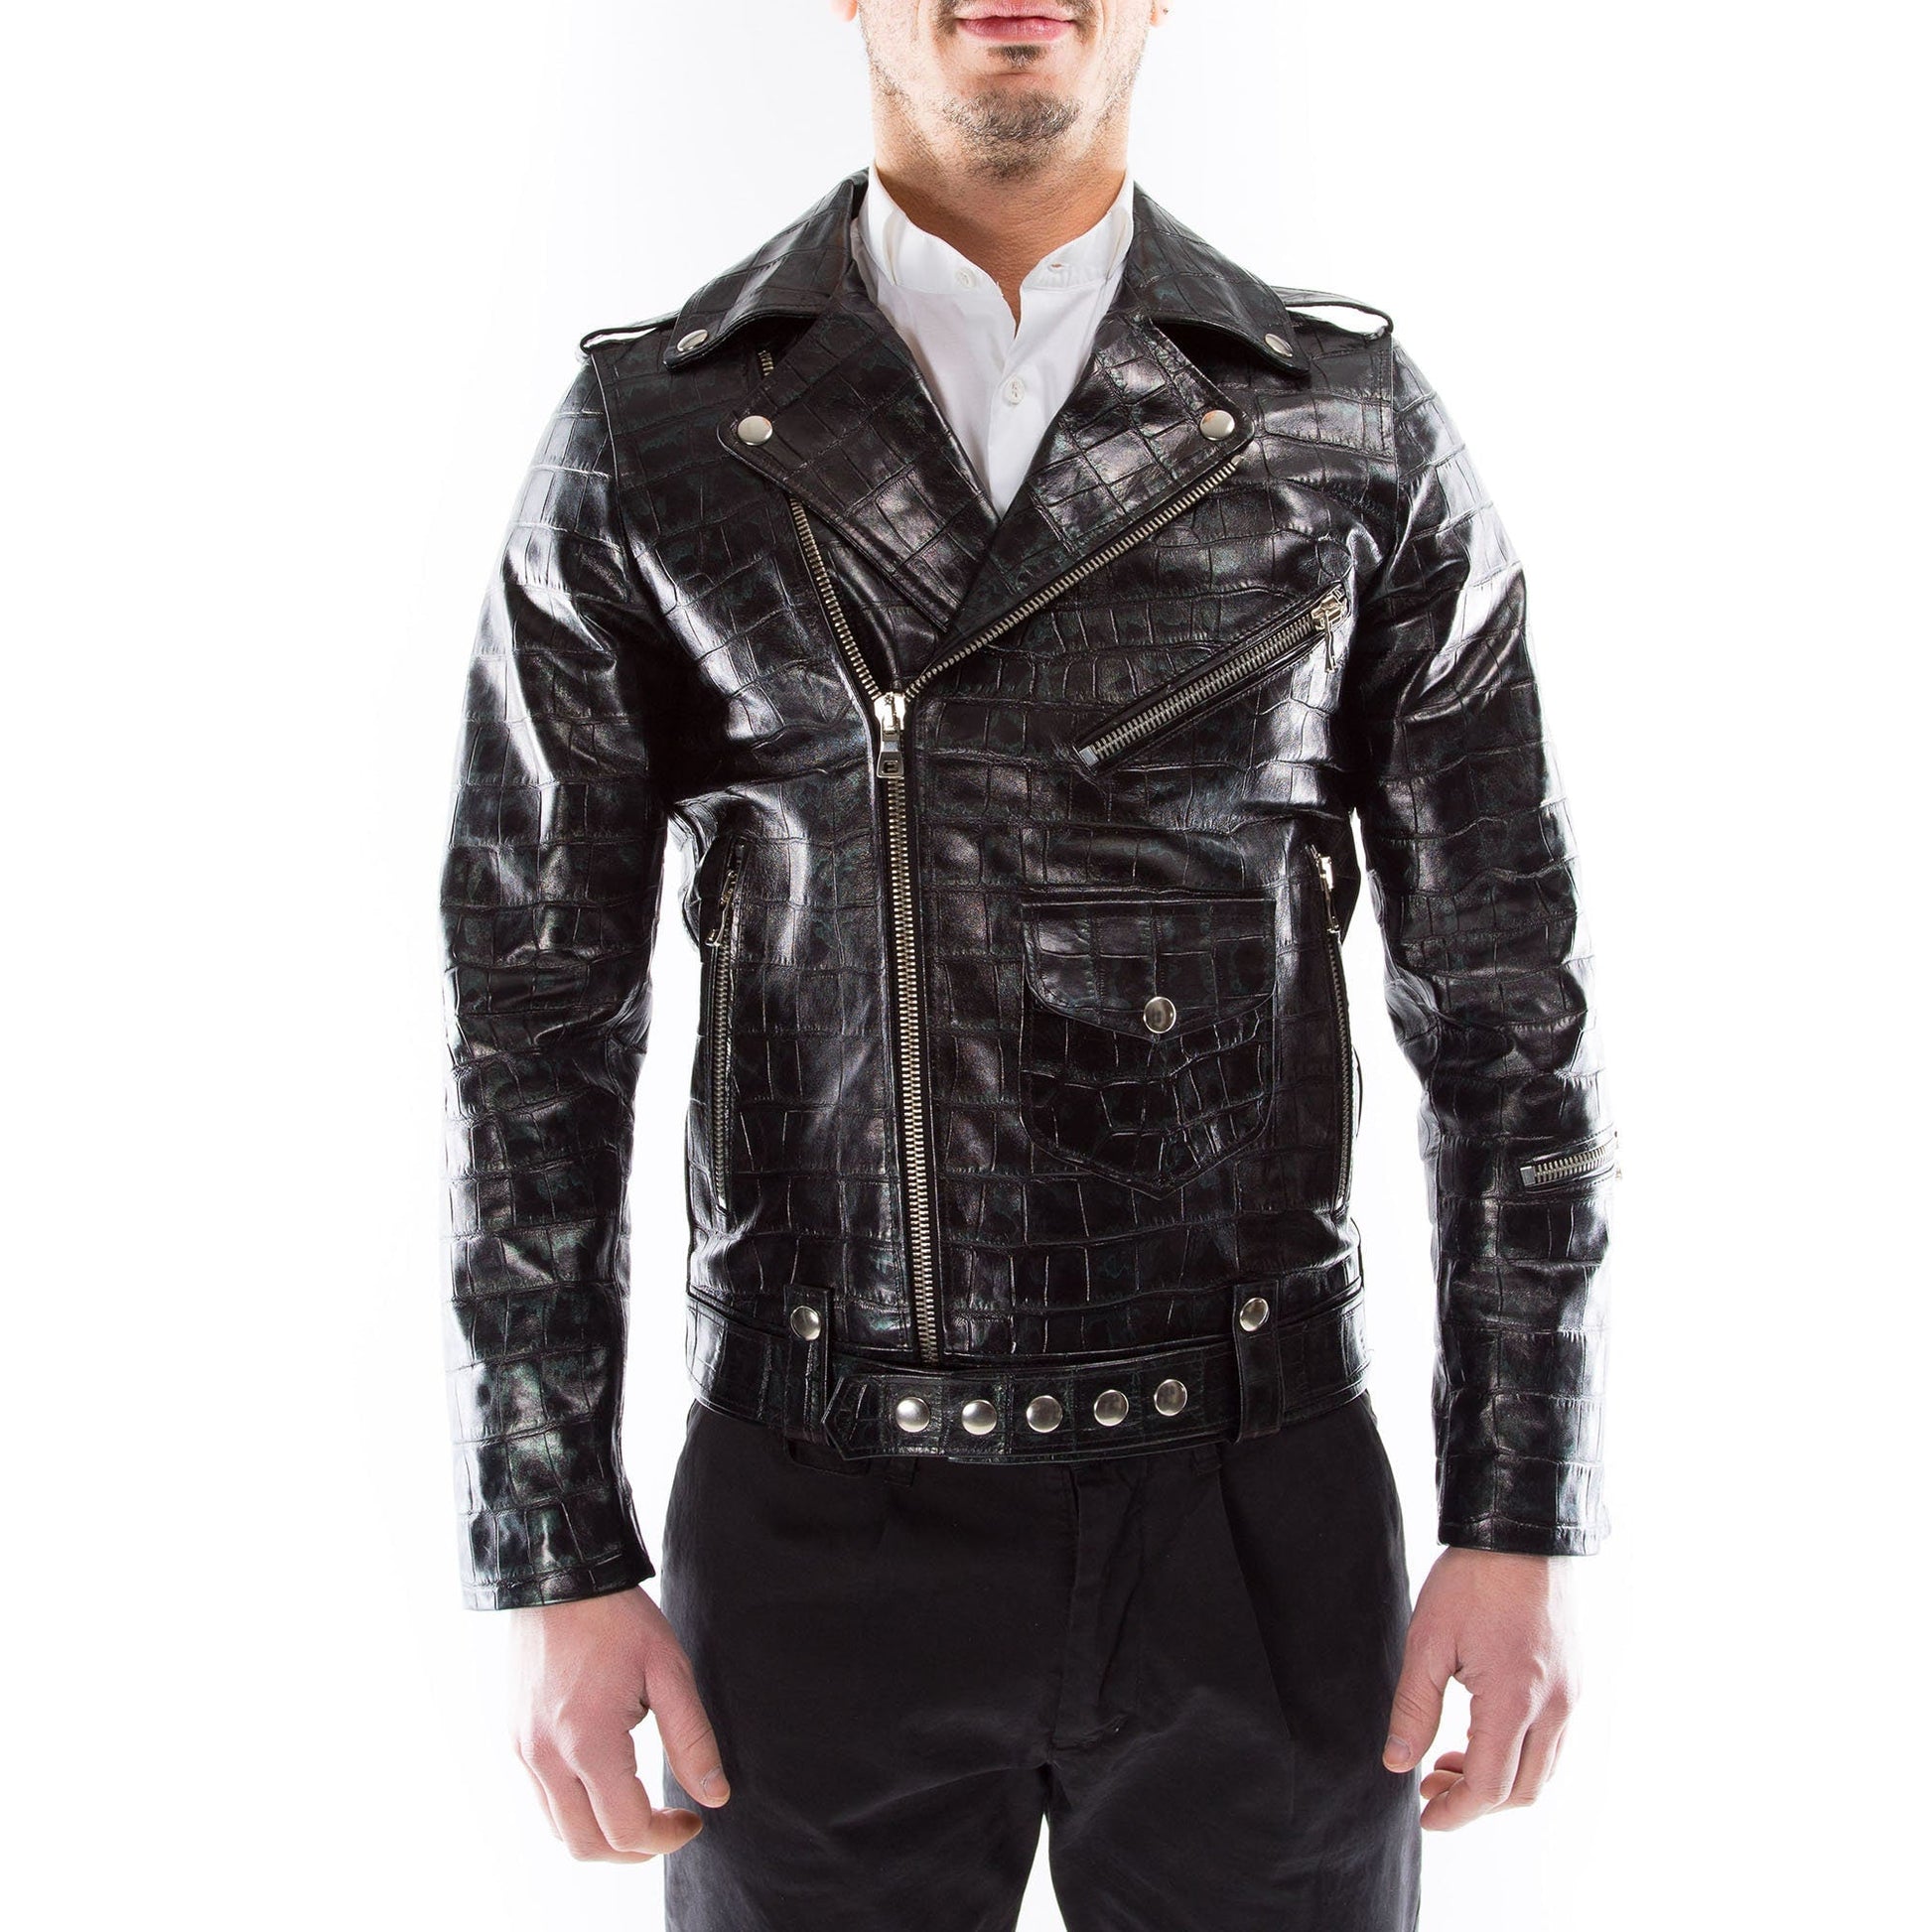 99percenthandmade Leather Jacket, Tailored to Your size, Lambskin Leather. Black